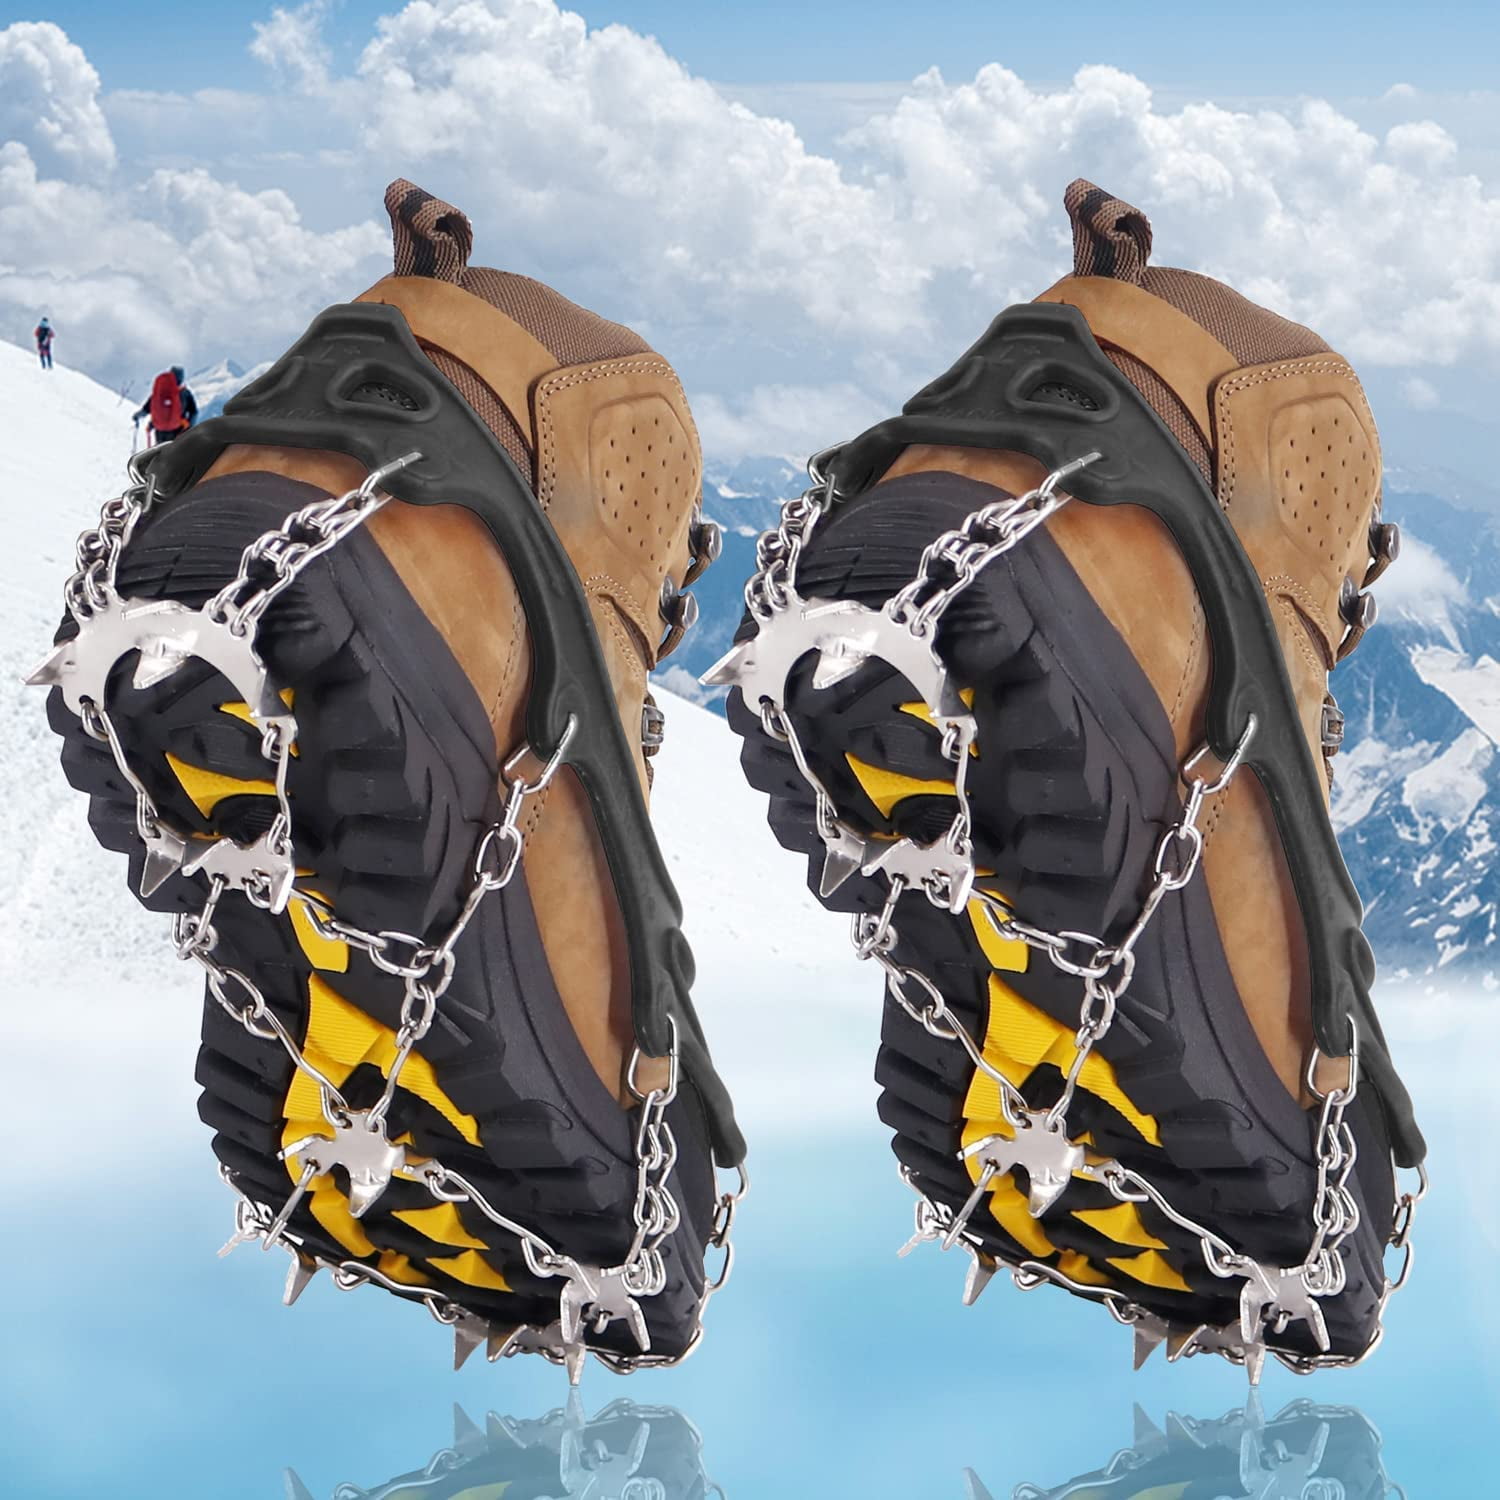  Crampons Ice Cleats Traction Snow Grips for Boots Shoes Women  Men Kids Anti Slip 19 Stainless Steel Spikes Safe Protect for Hiking  Fishing Walking Climbing Mountaineering (Black, Medium) : Sports